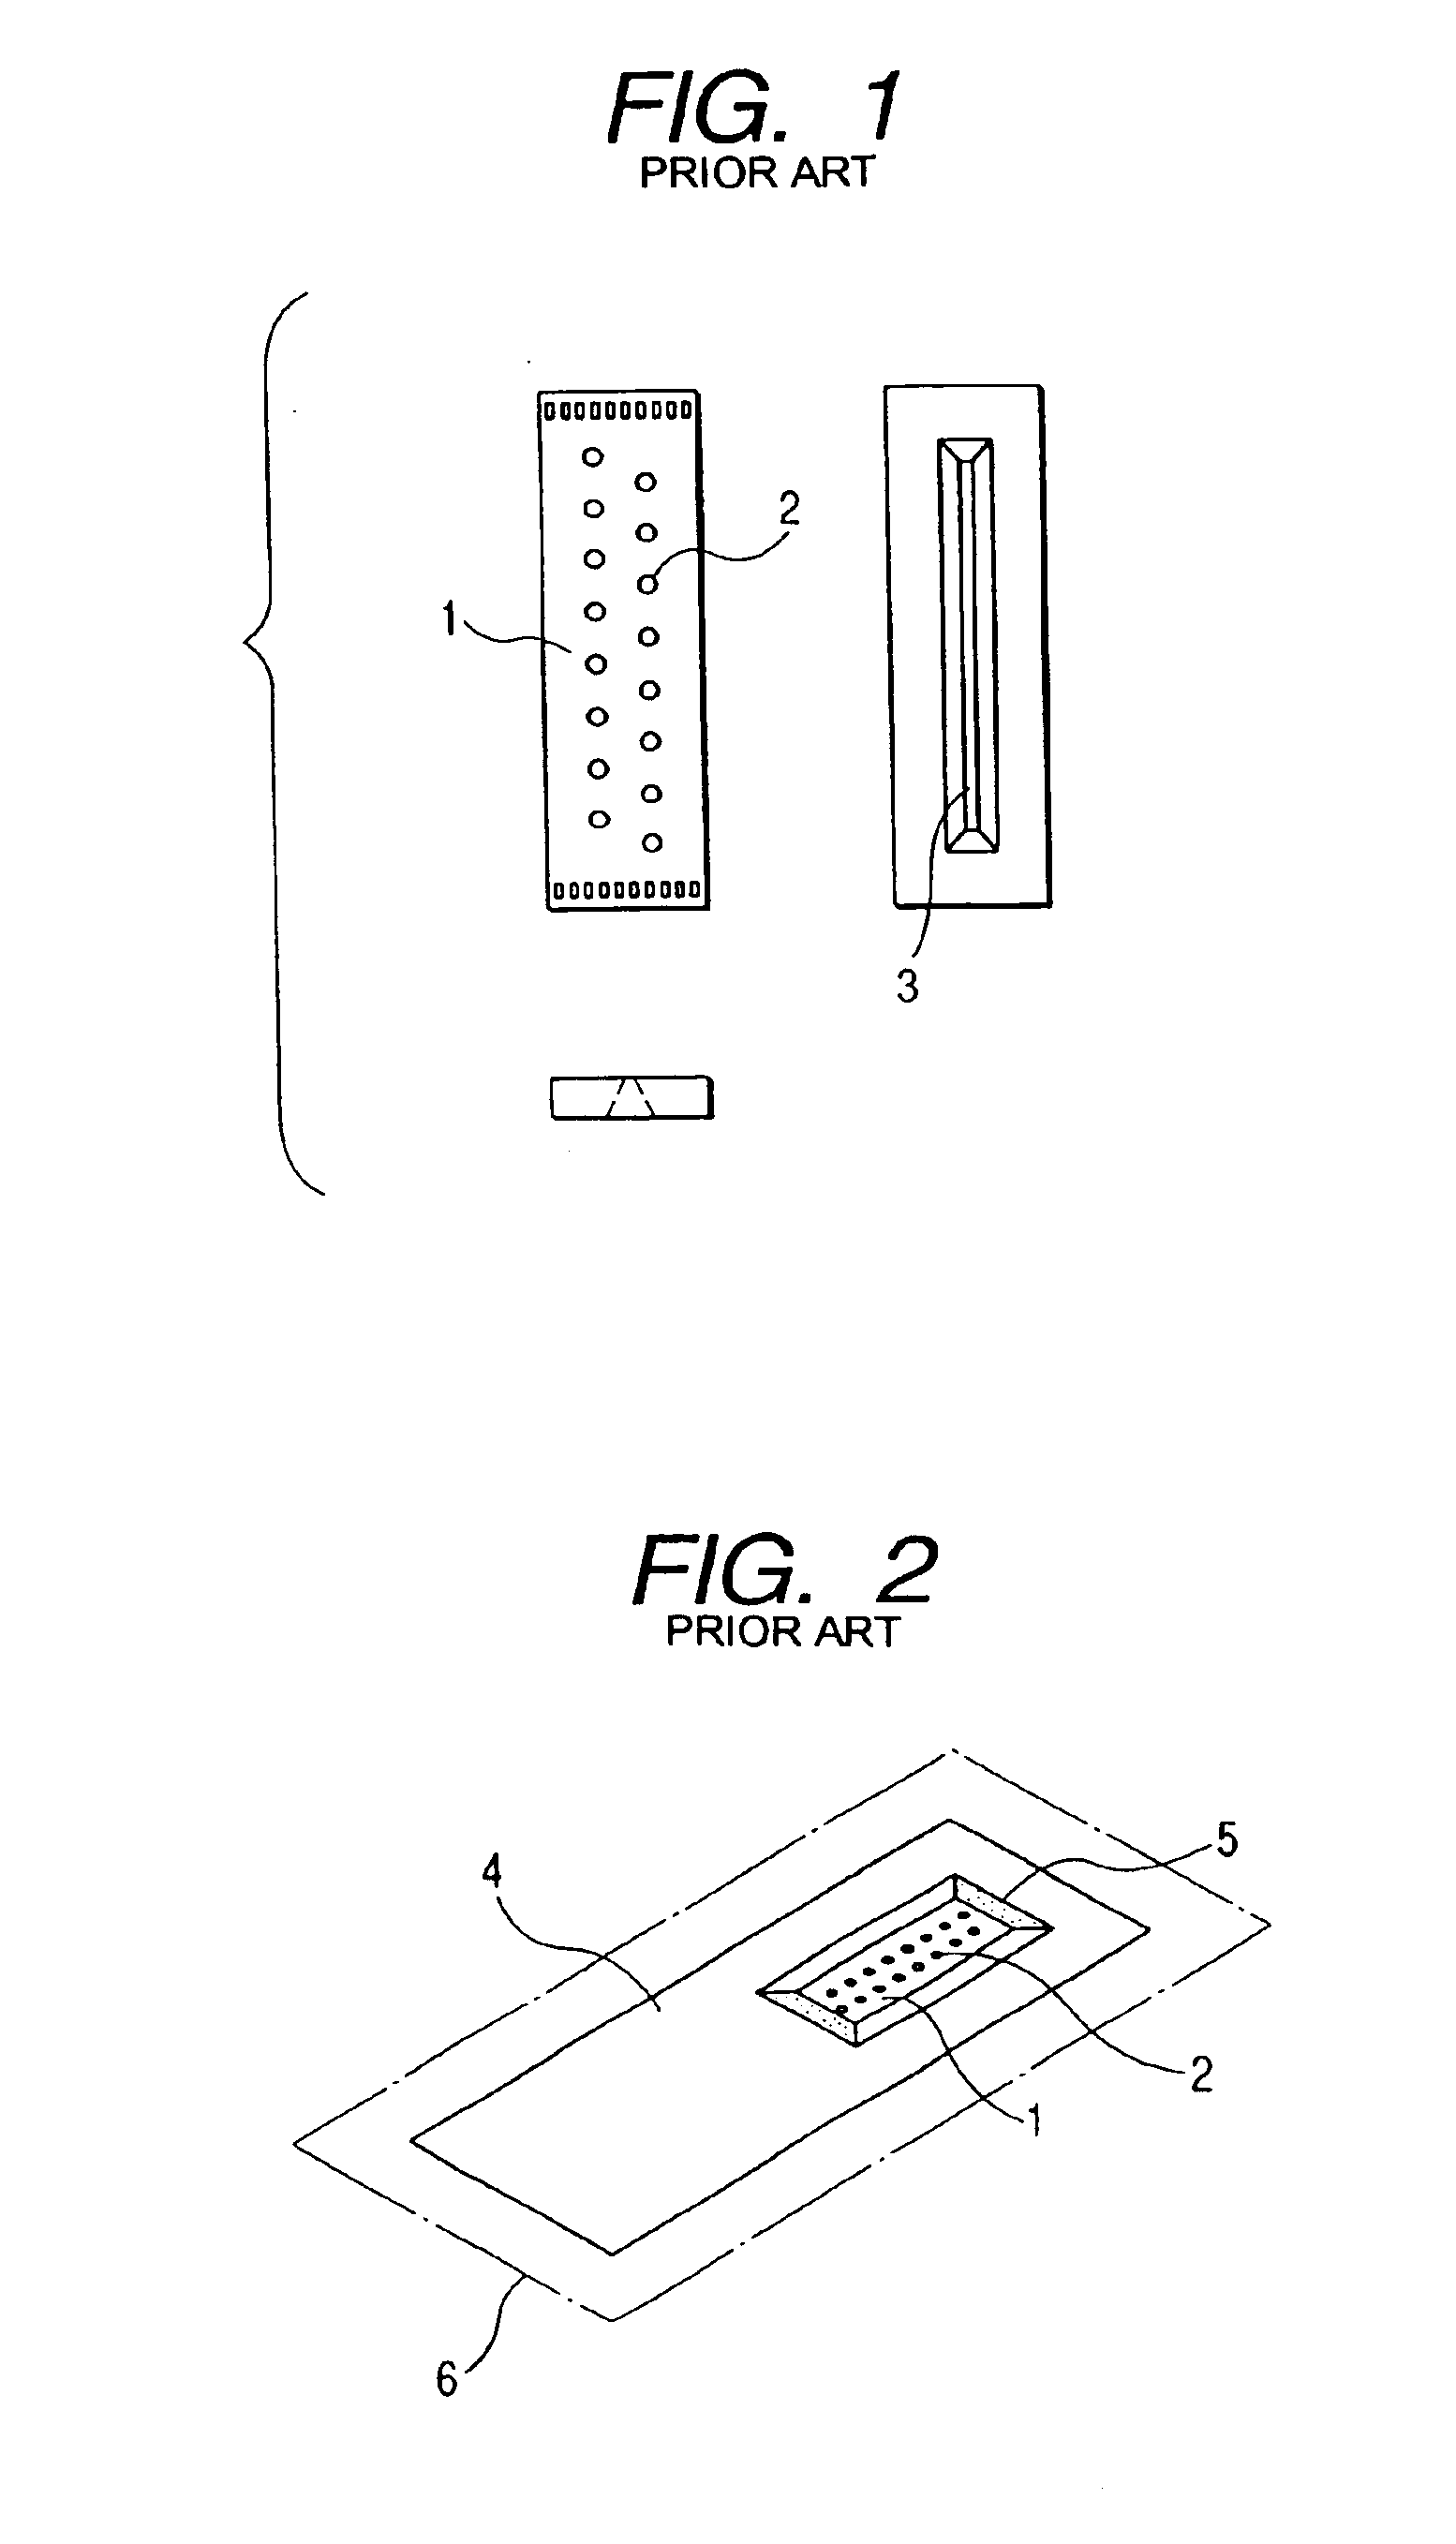 Method for manufacturing an ink jet recording head, an ink jet recording head manufactured by such method of manufacture, and an ink jet recording apparatus having such ink jet recording head mounted thereon